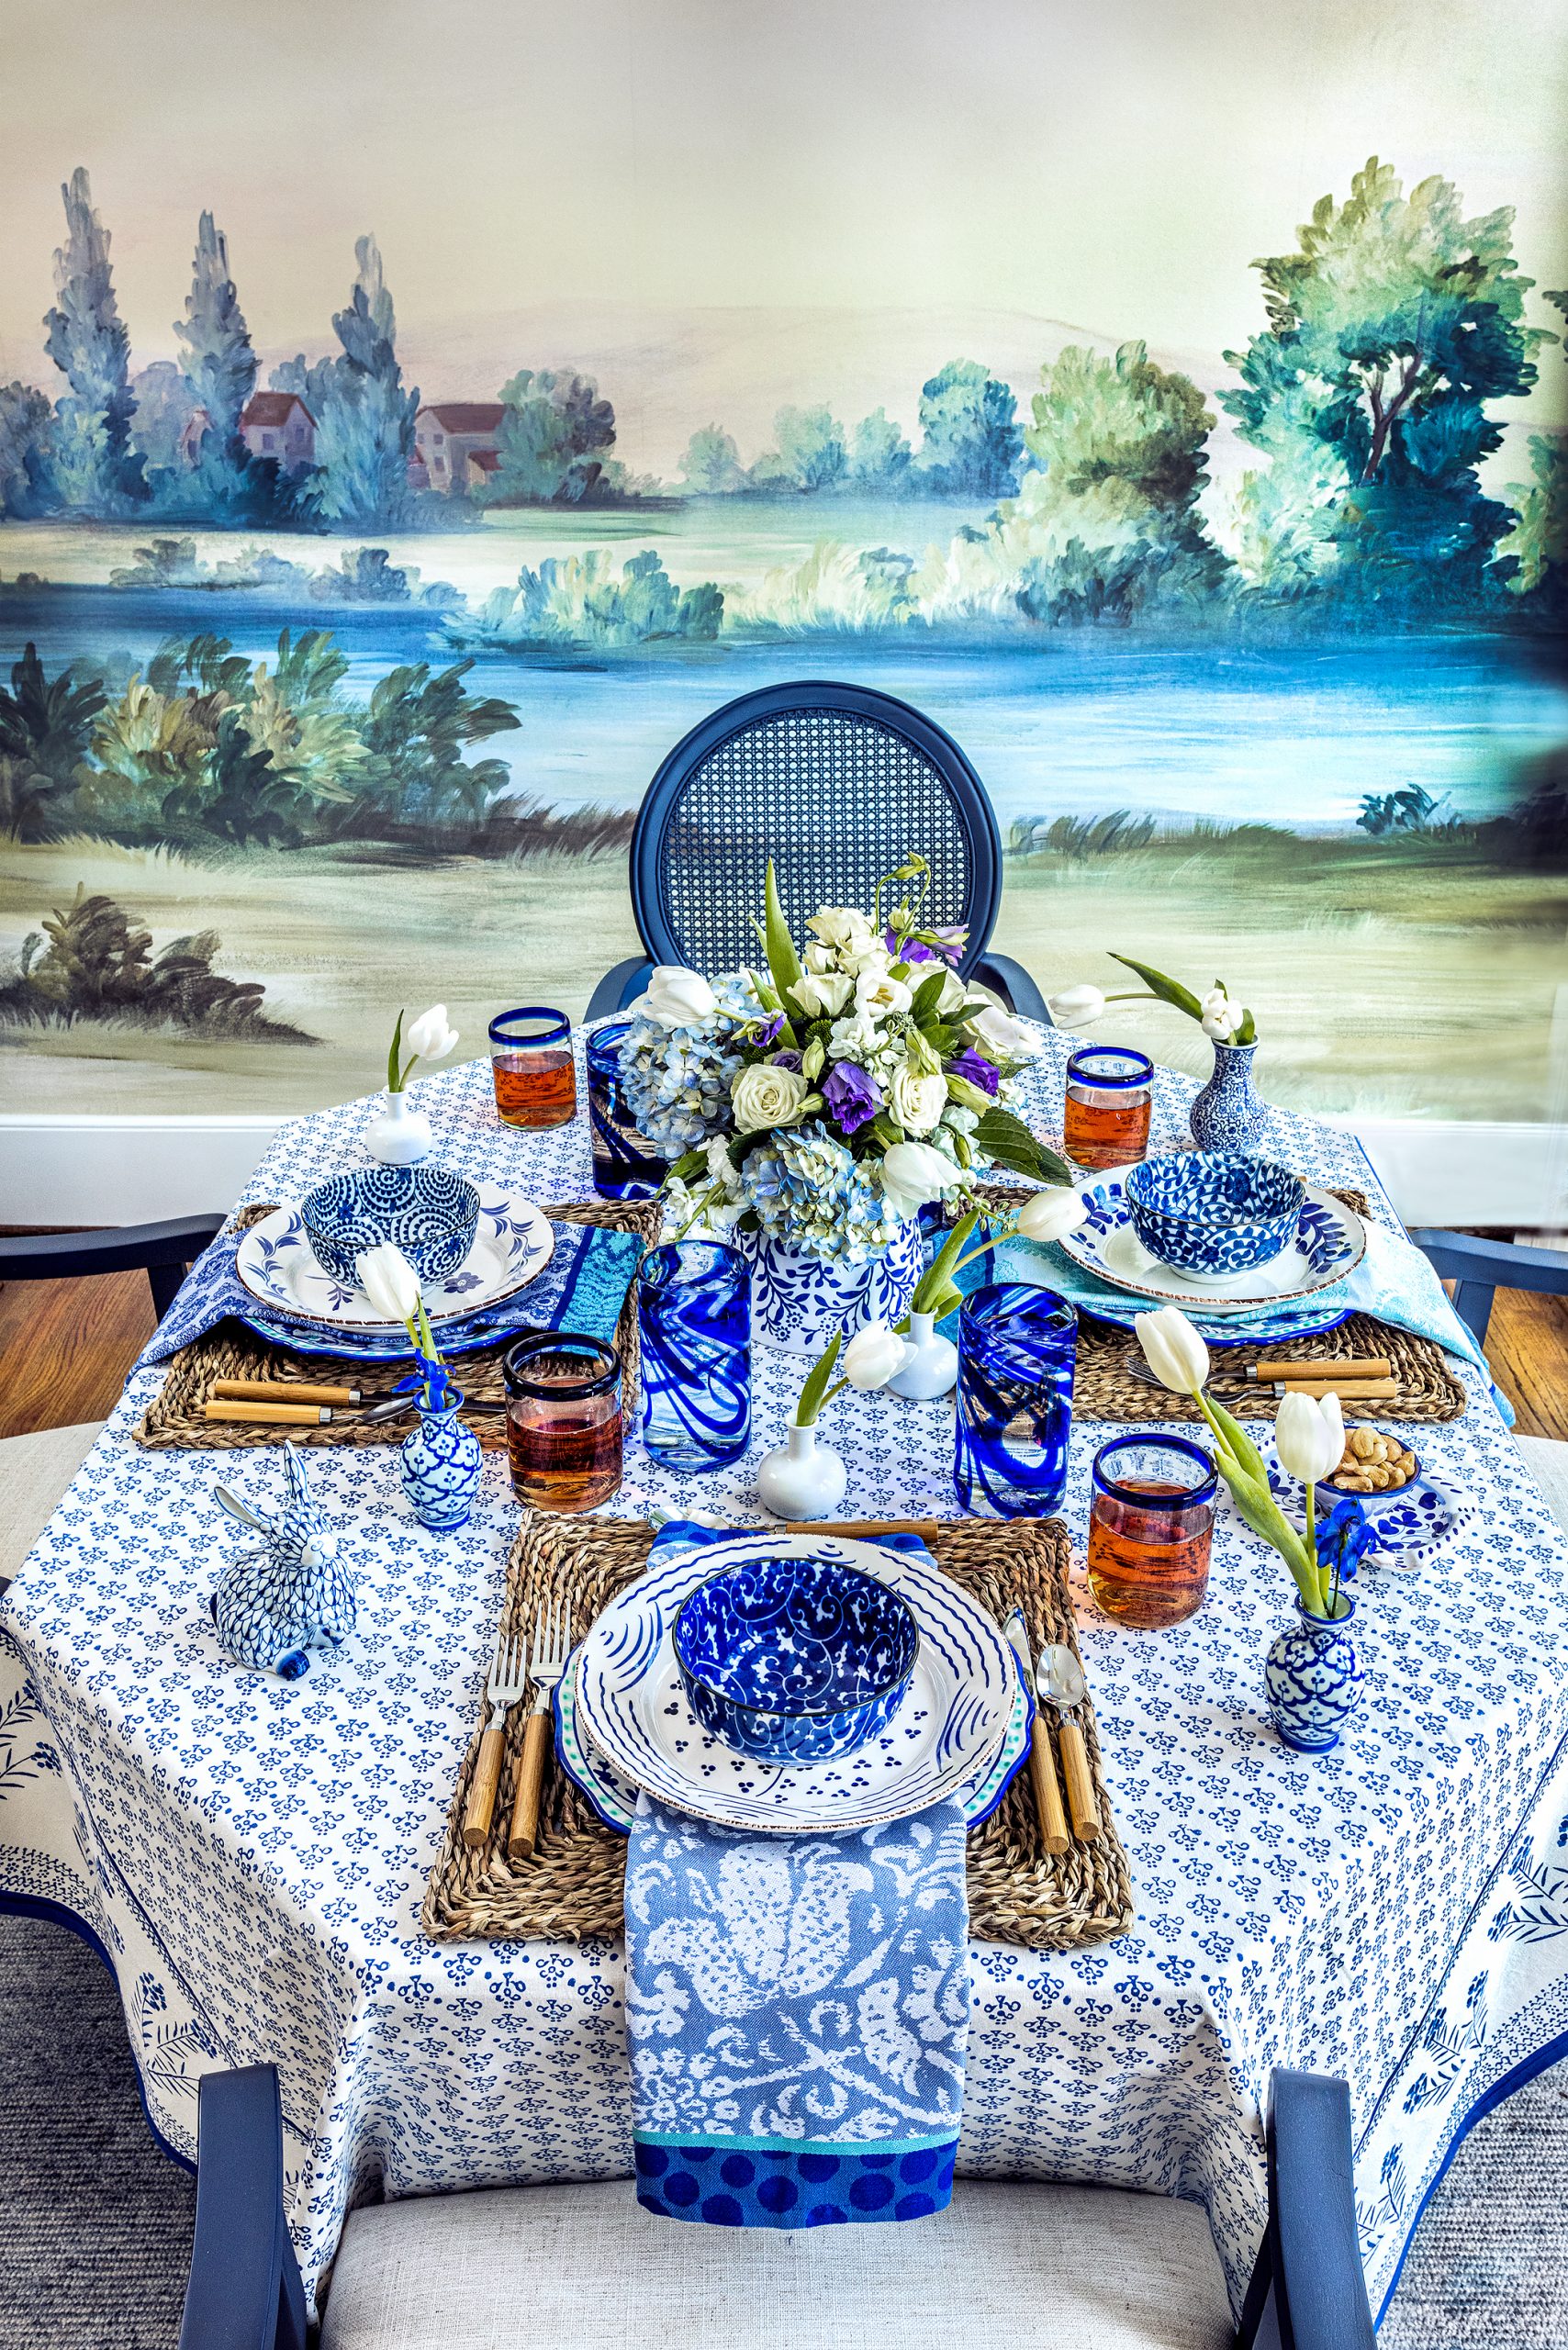 Creating a tablescape with accents of blue and white is both fresh and timeless. It is a great way to mix traditional patterns with modern influences. Cobalt blue can be classical and bold in china, glassware, and fabrics. The original source of blue for fabric is the tropically grown indigo plant, which is very labor intensive and expensive to produce. South Carolina was briefly a major producer of indigo dye. 